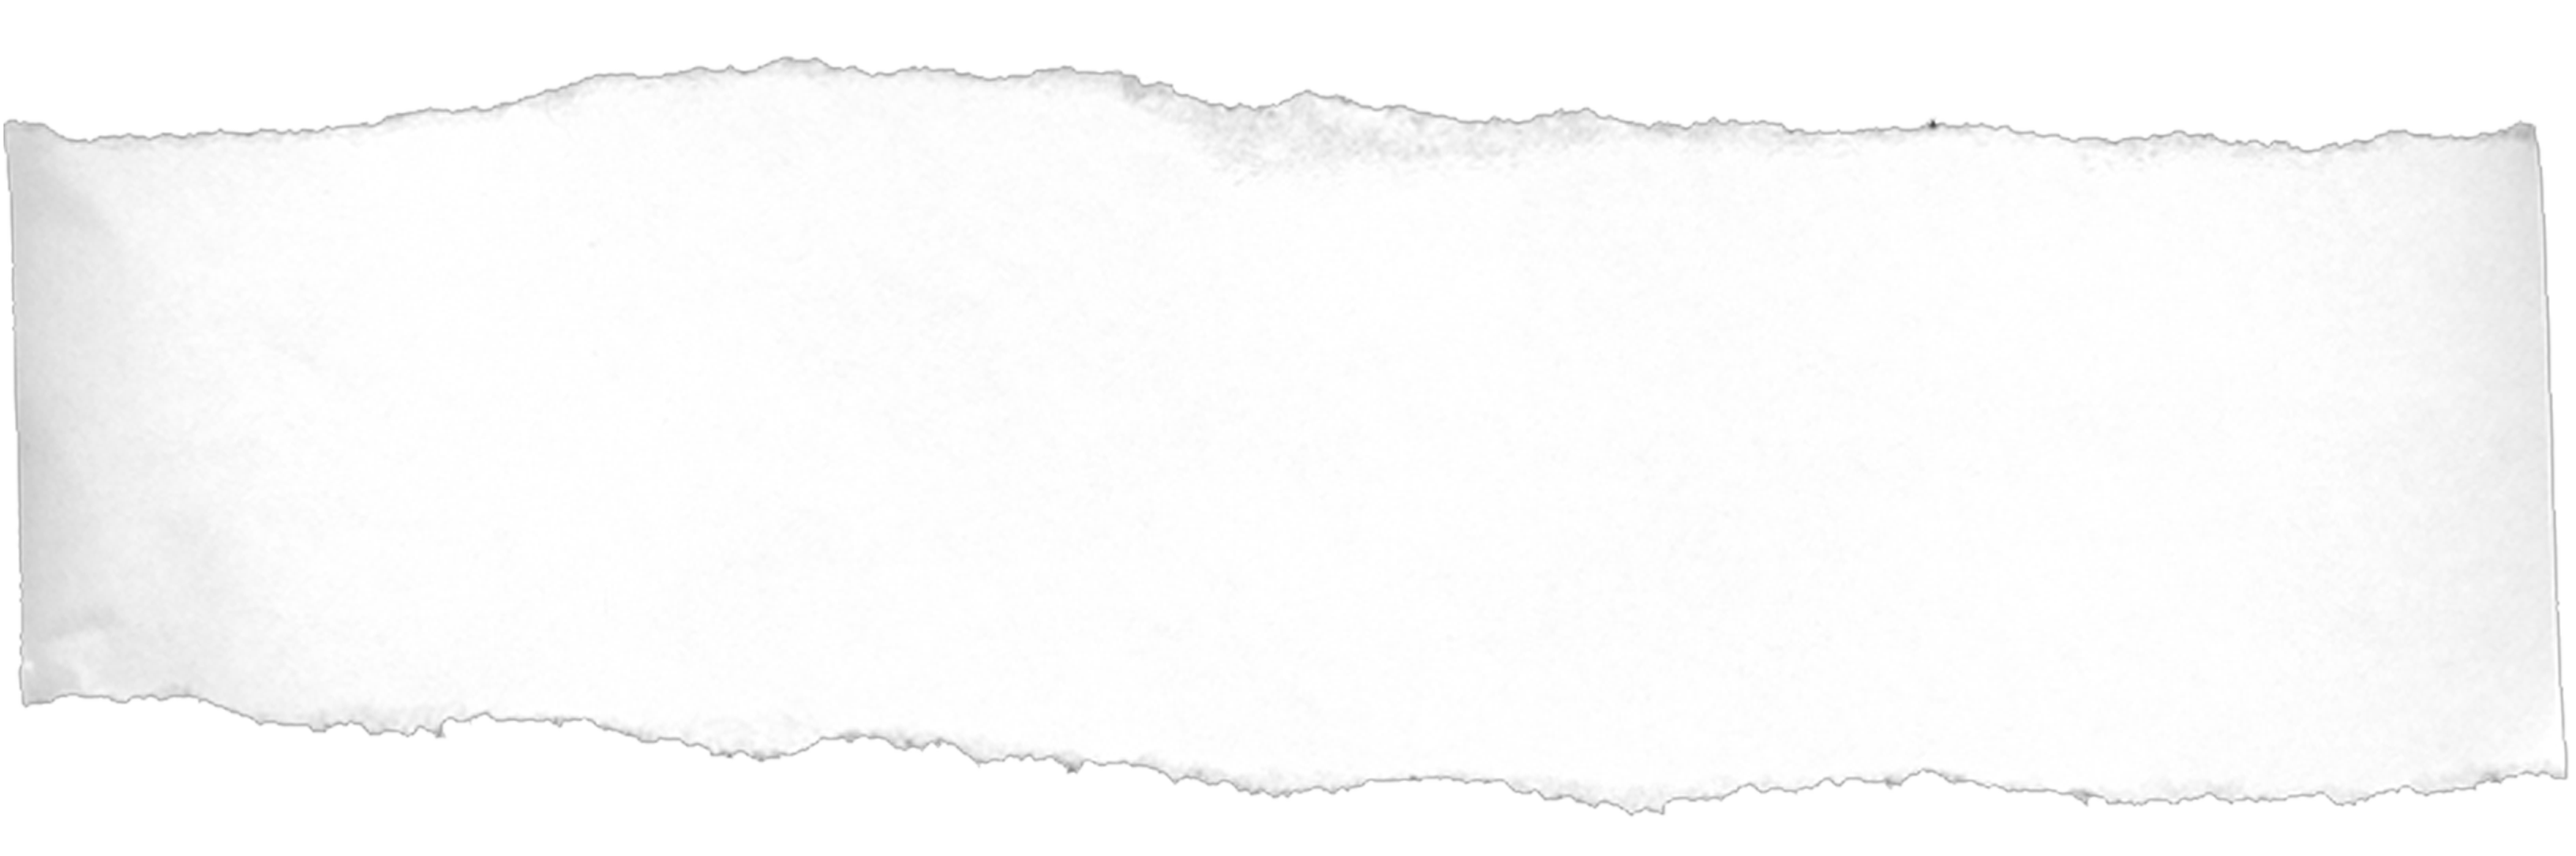 Texture PNG Image HD